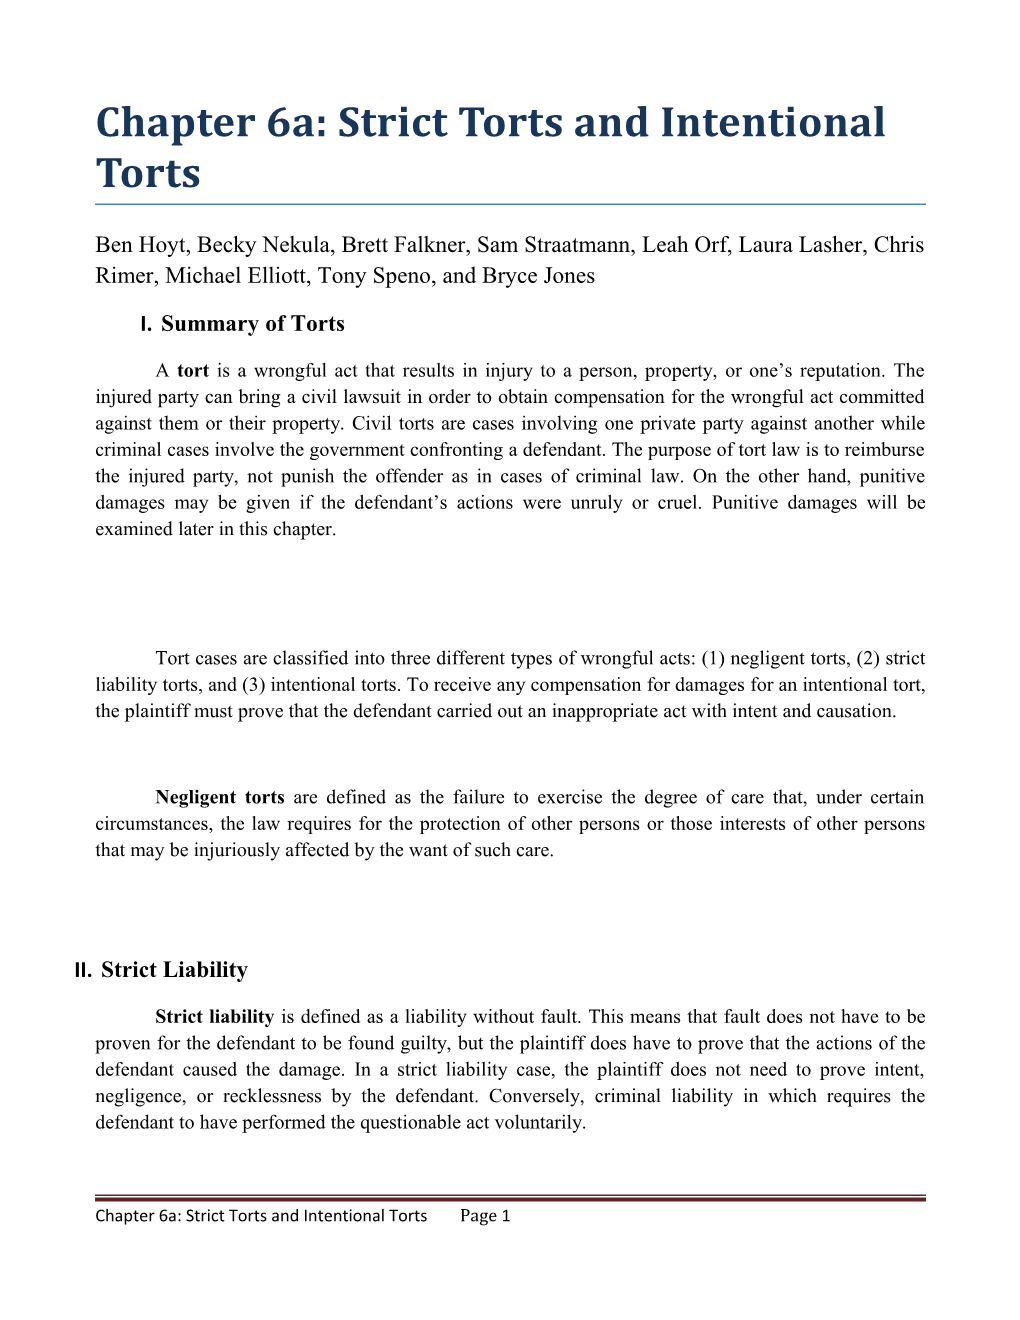 Chapter 6A:Strict Torts and Intentional Torts